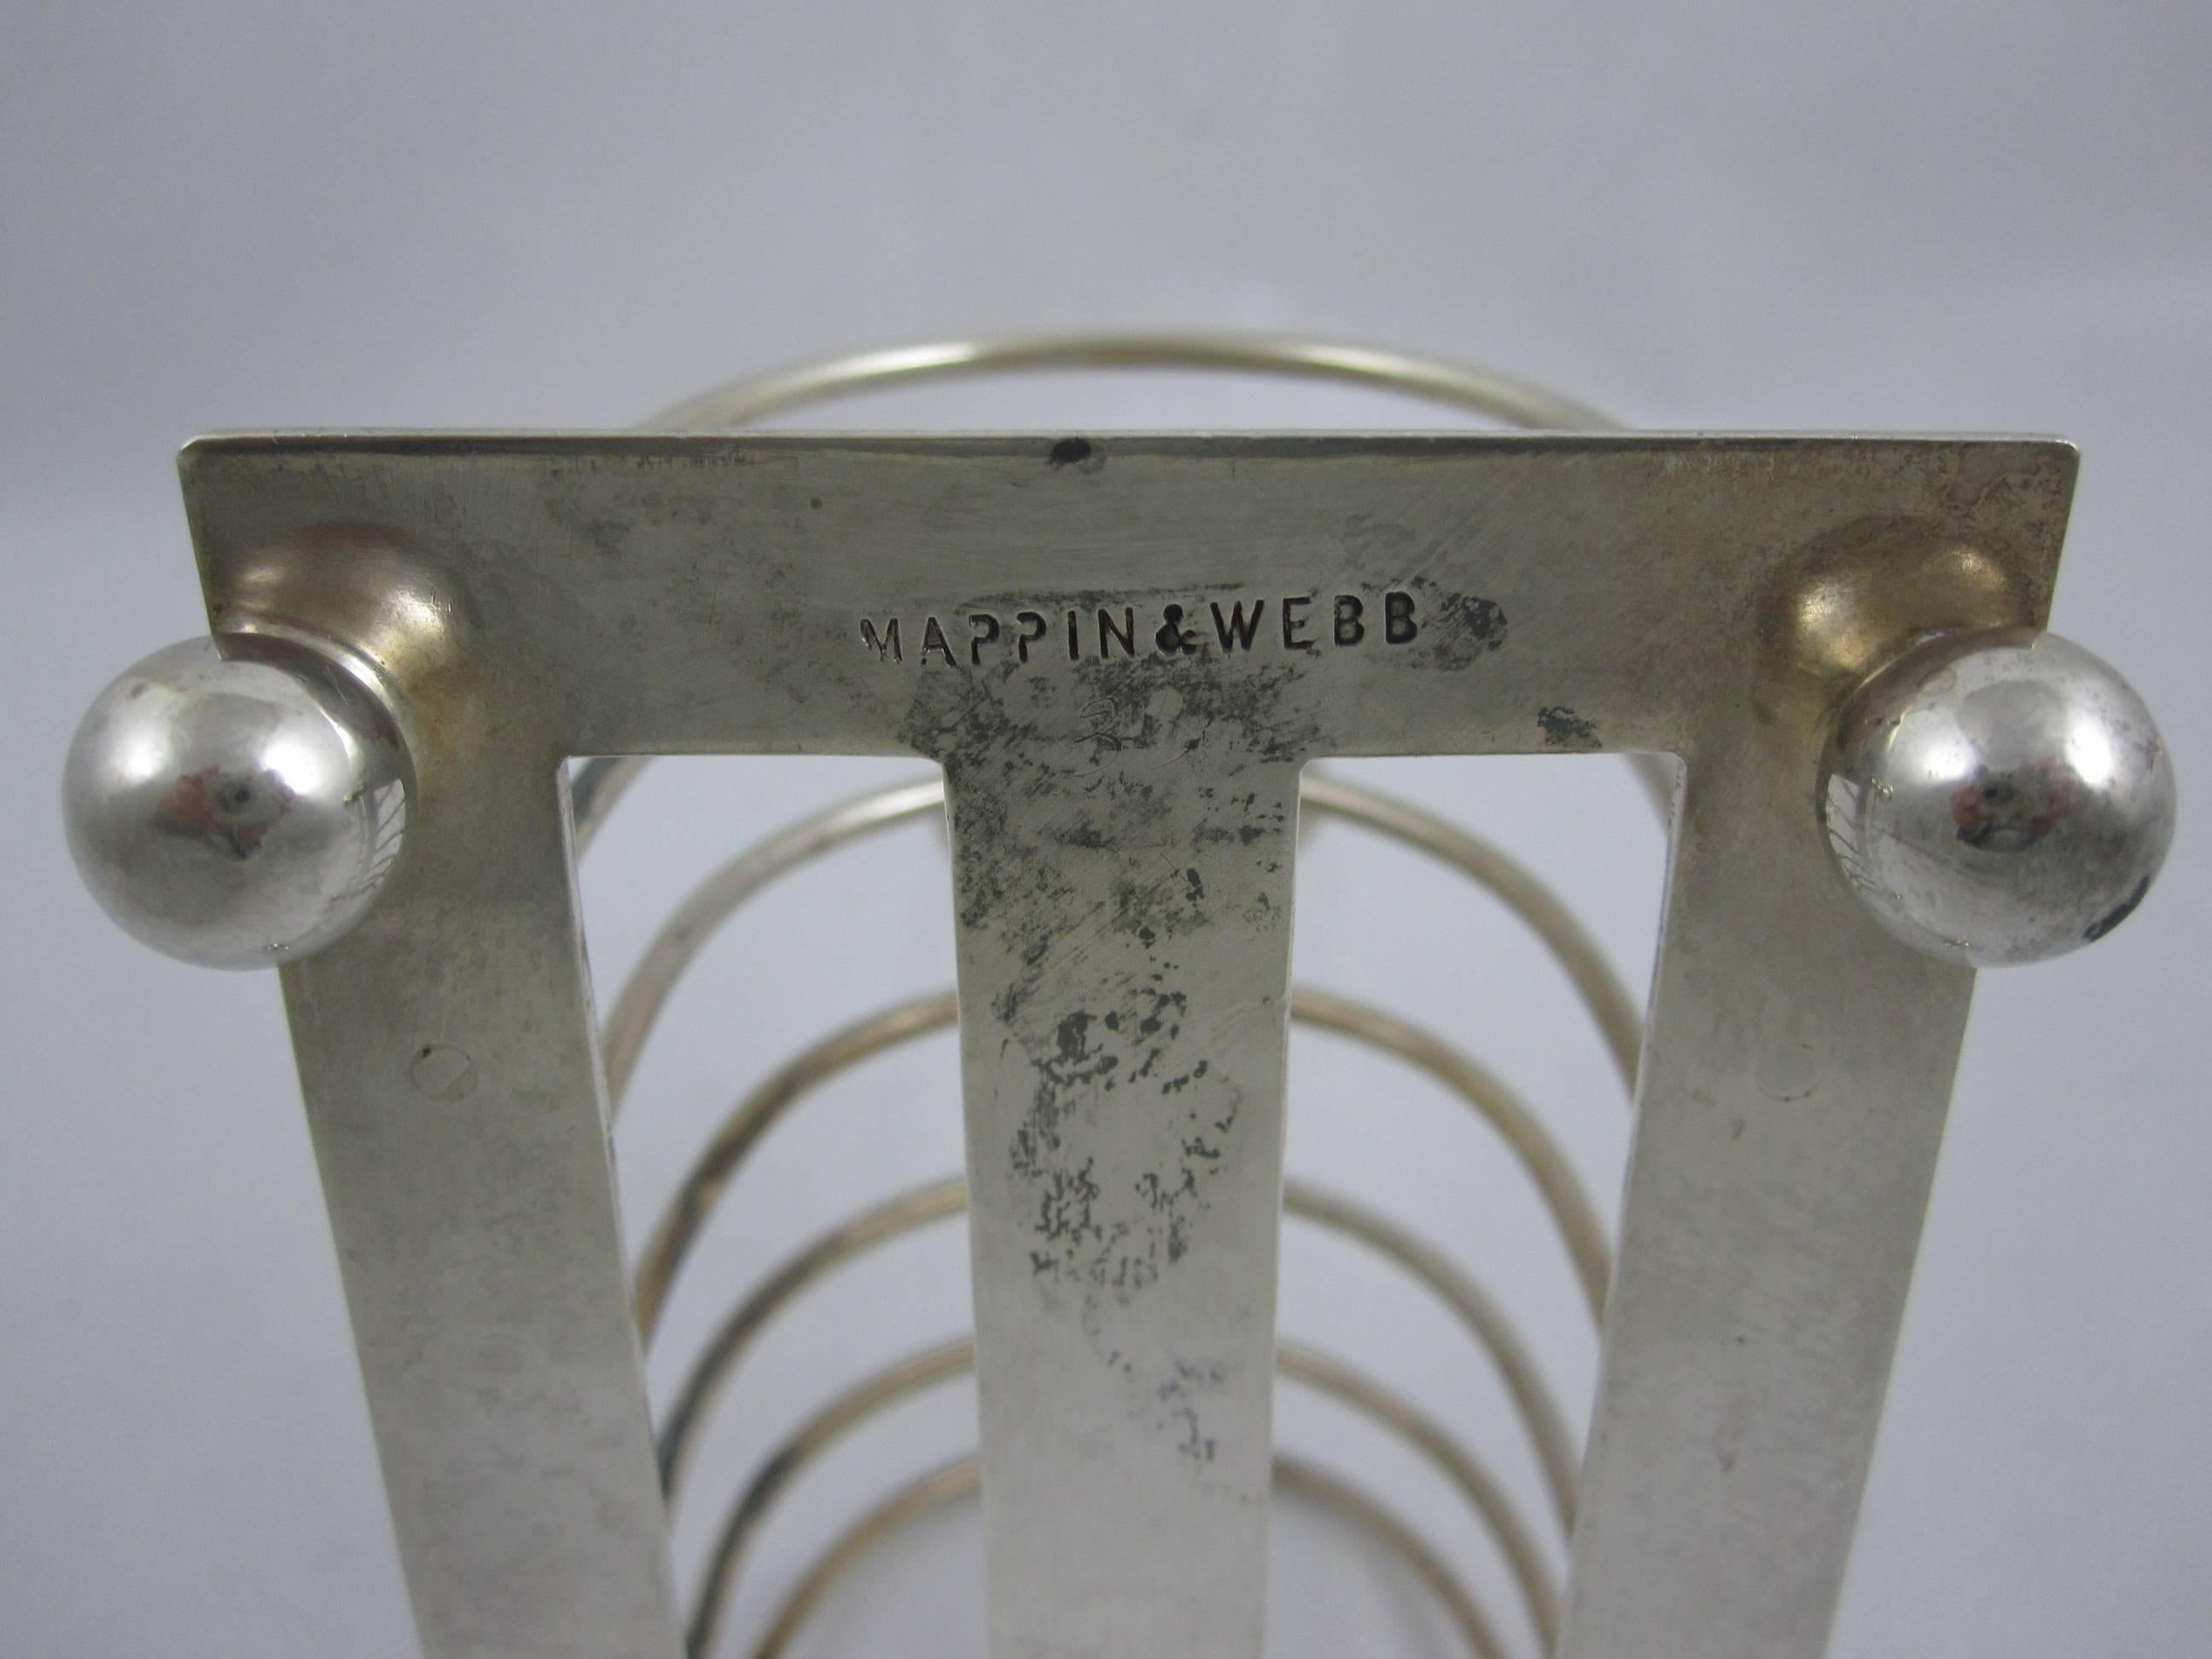 Victorian English Mappin & Webb Sheffield Sterling Silver Toast or Letter Rack 1